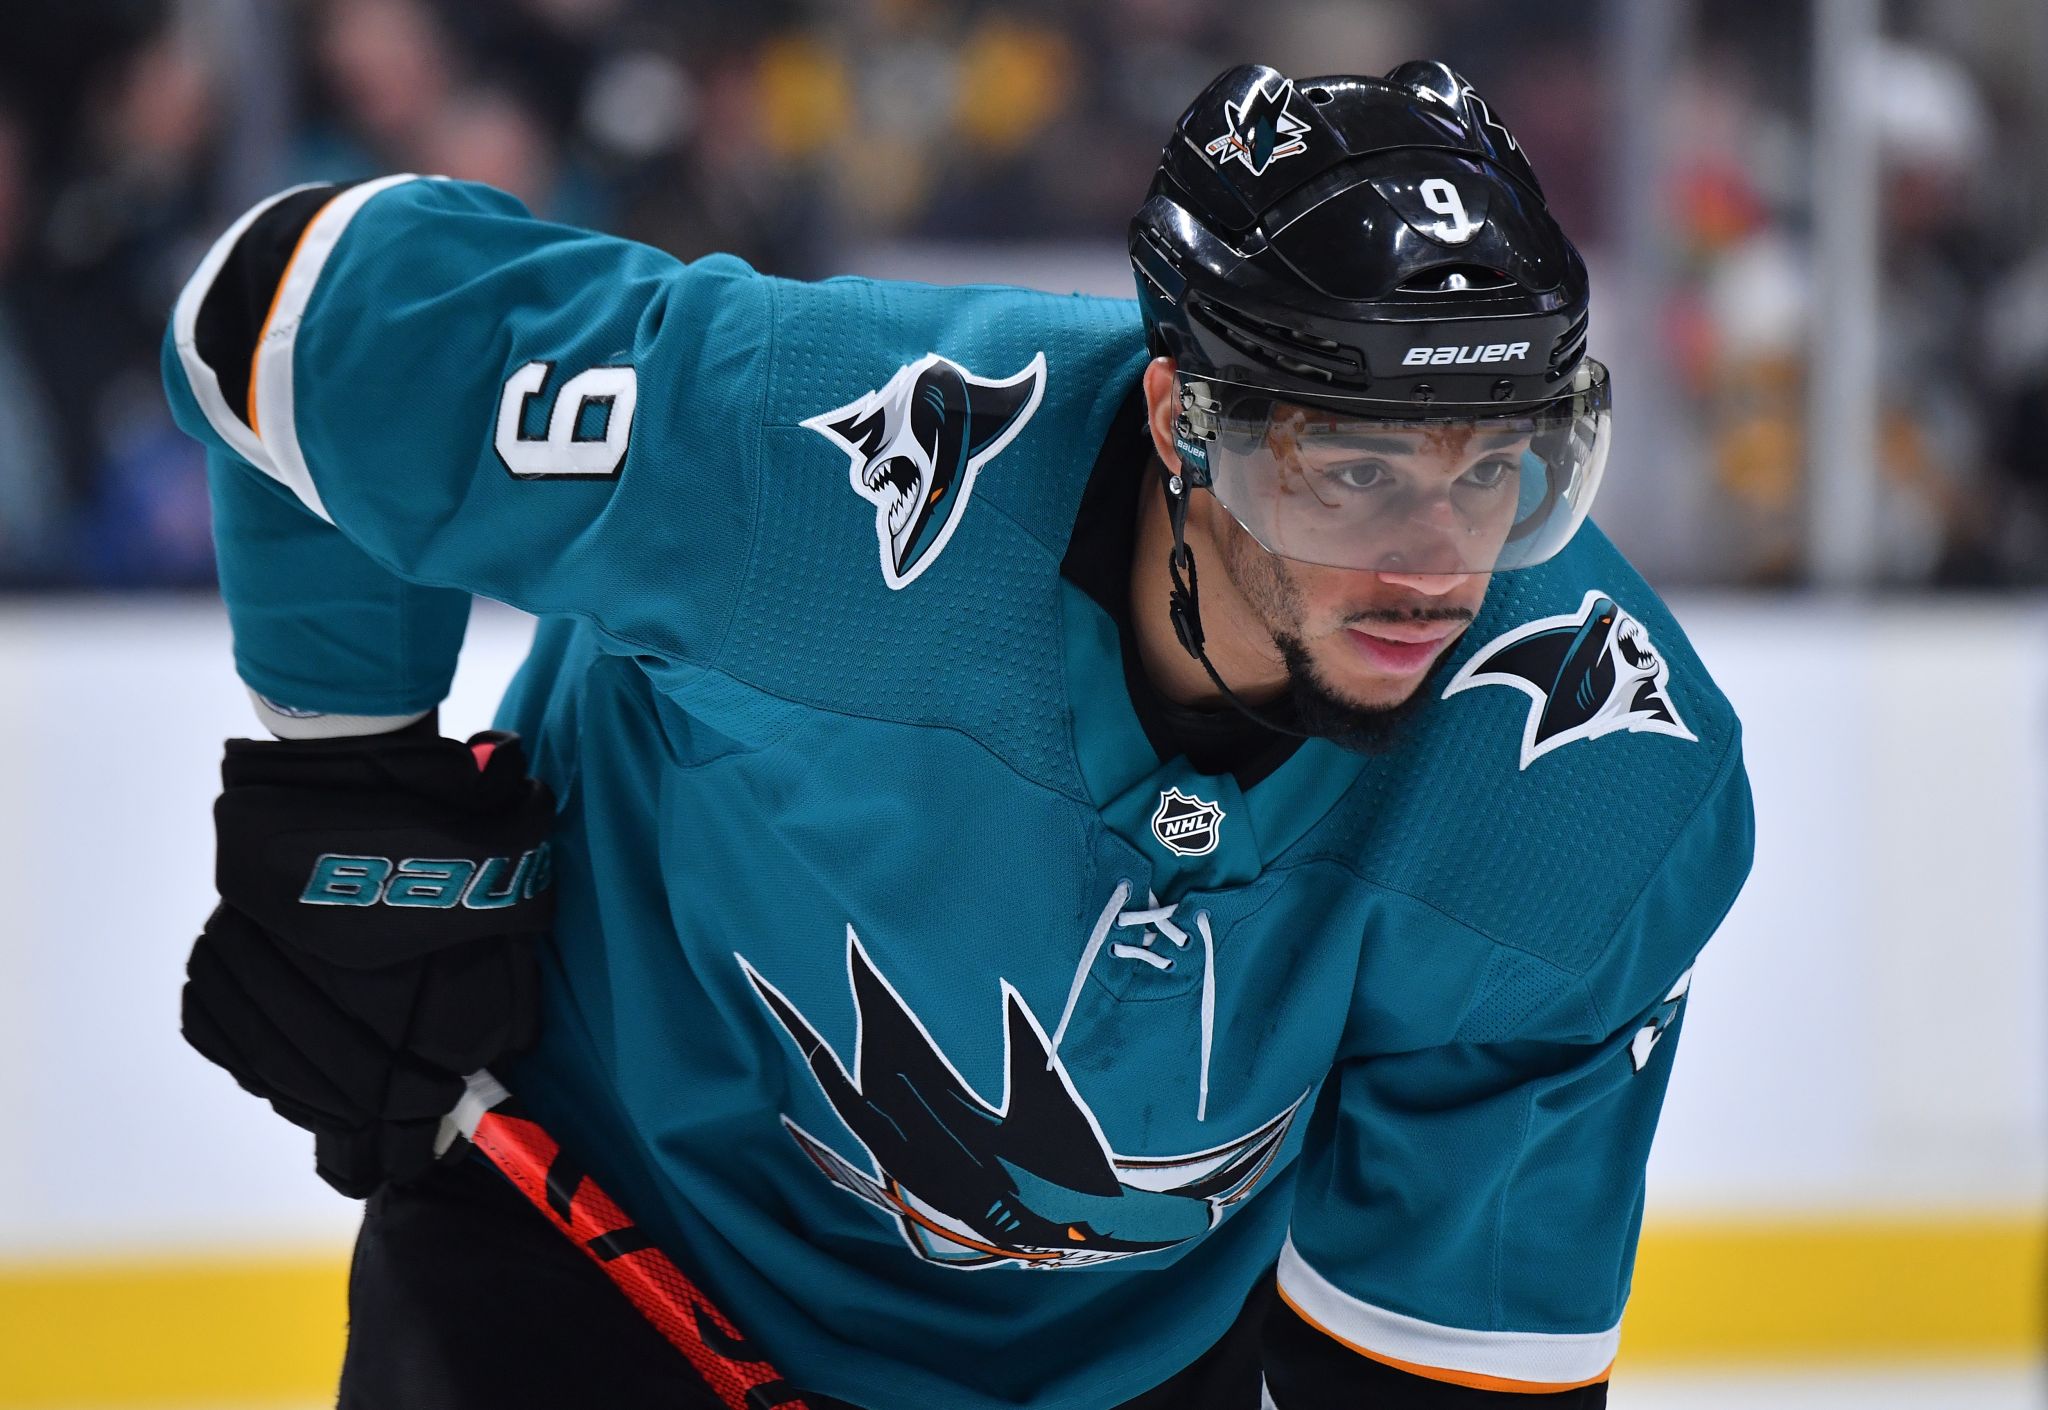 Evander Kane Grievance With Sharks Takes Place Today